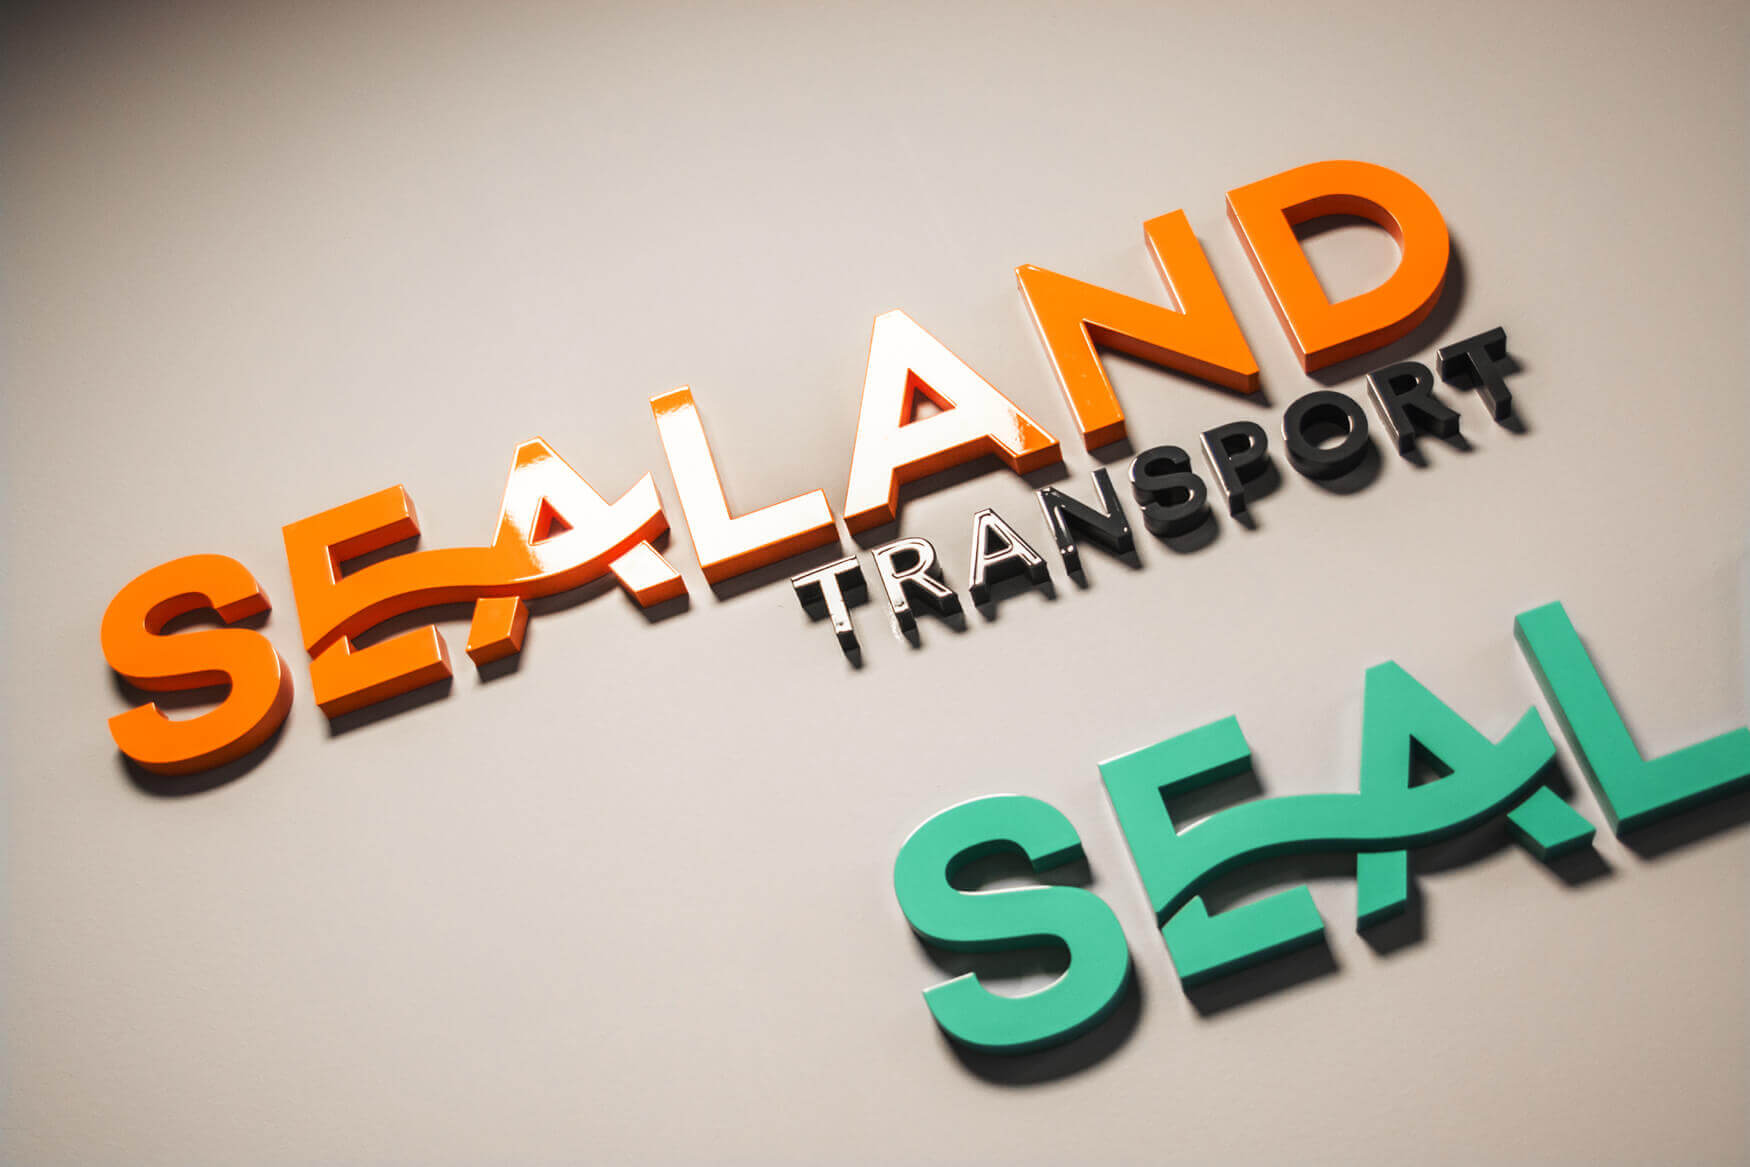 Sealand - Sealand - 3D block letters placed on the wall spray painted